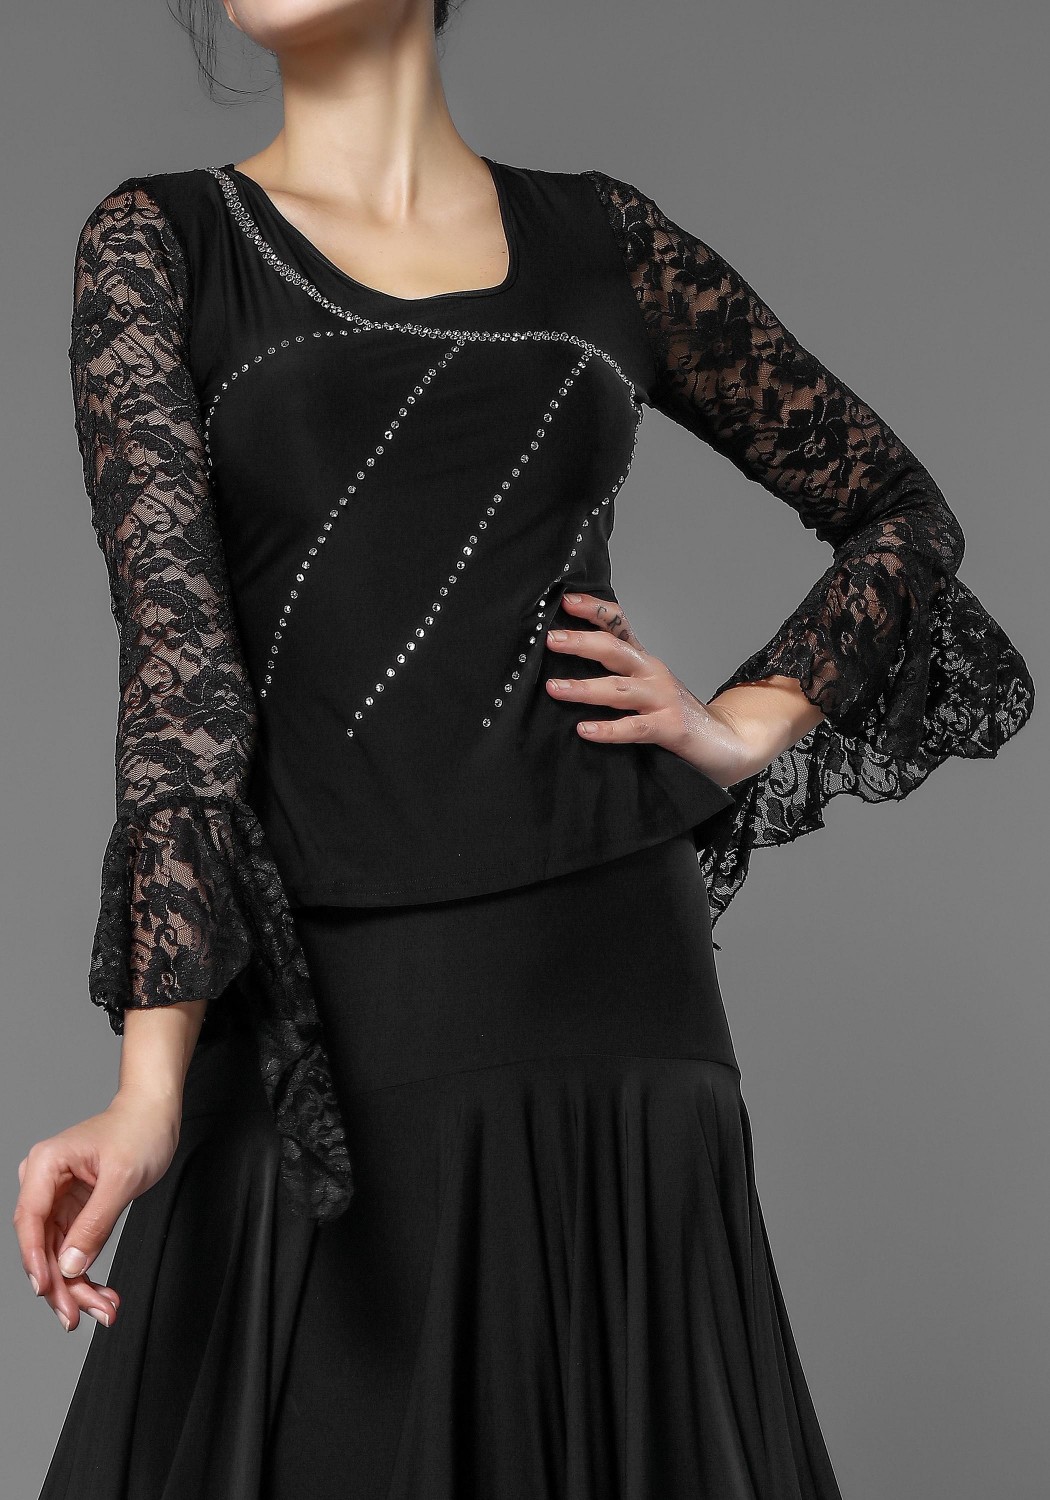 Luxury Black Lace and Crepe Top